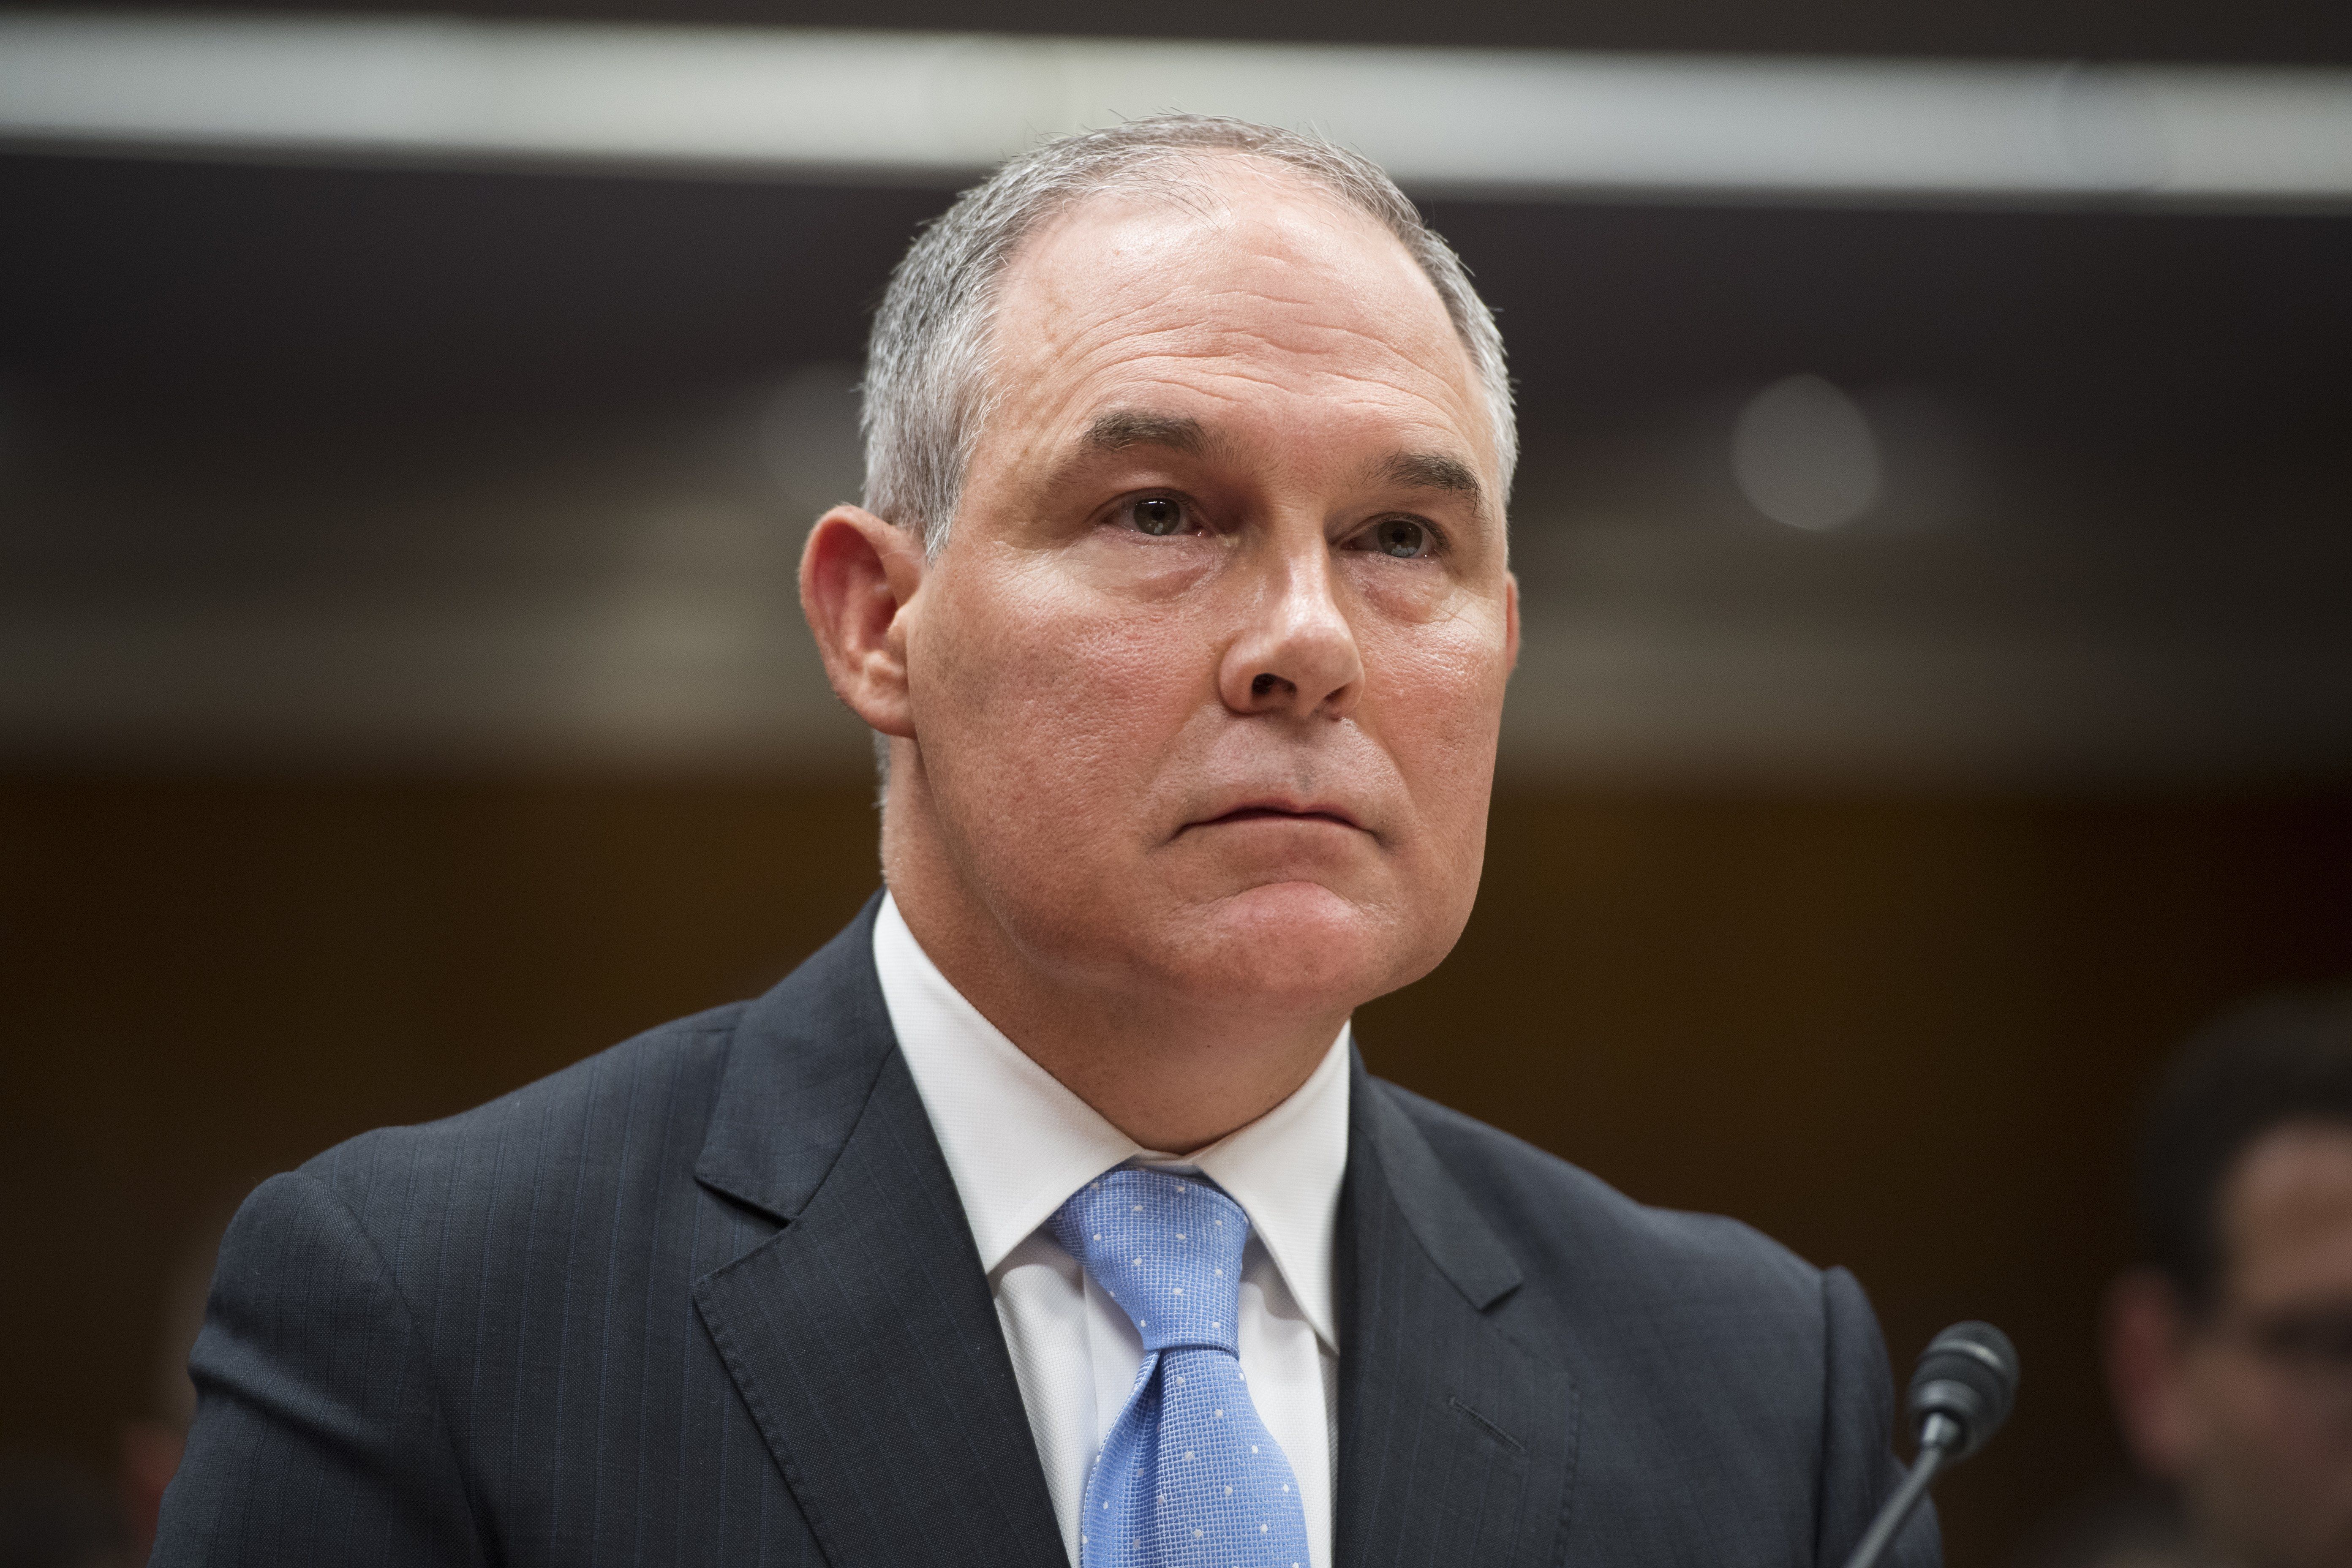 Environmental Protection Agency (EPA) Administrator Scott Pruitt testifies about the fiscal year 2018 budget during a Senate Appropriations Subcommittee on Interior, Environment, and Related Agencies hearing on Capitol Hill in Washington, DC, June 27, 201